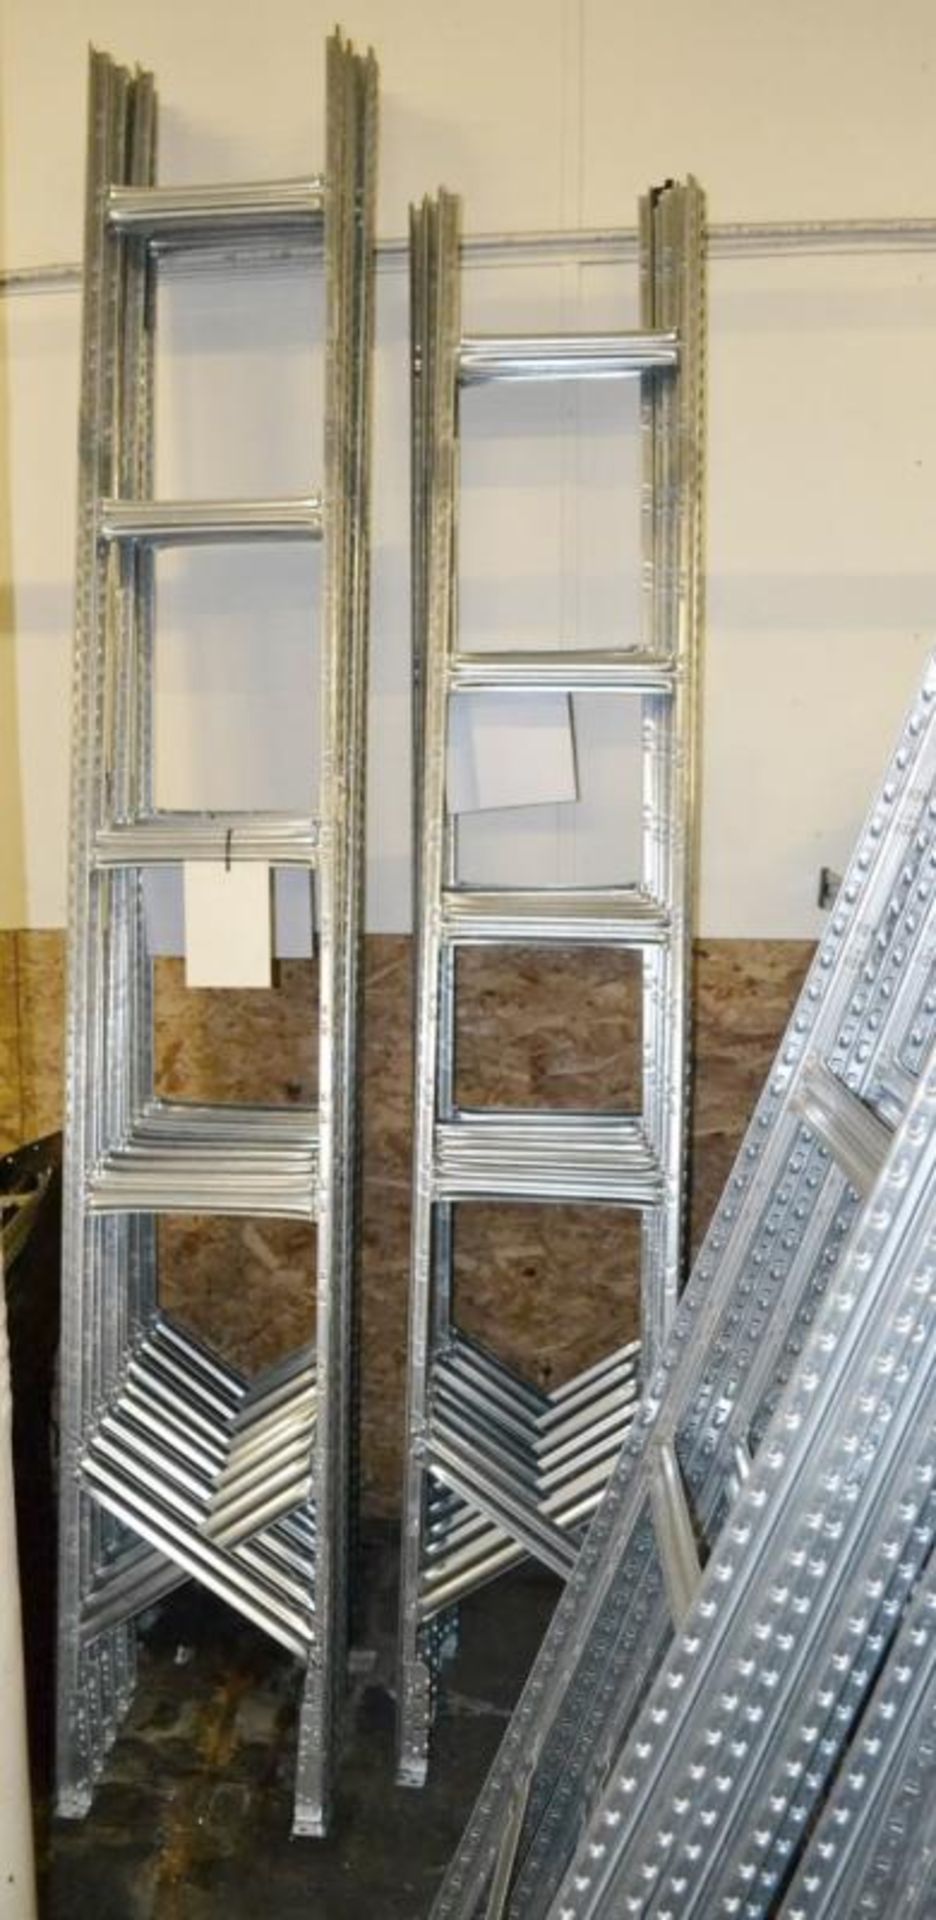 13 x Bays of Metalsistem Steel Modular Storage Shelving - Includes 28 Pieces - Recently Removed - Image 15 of 17